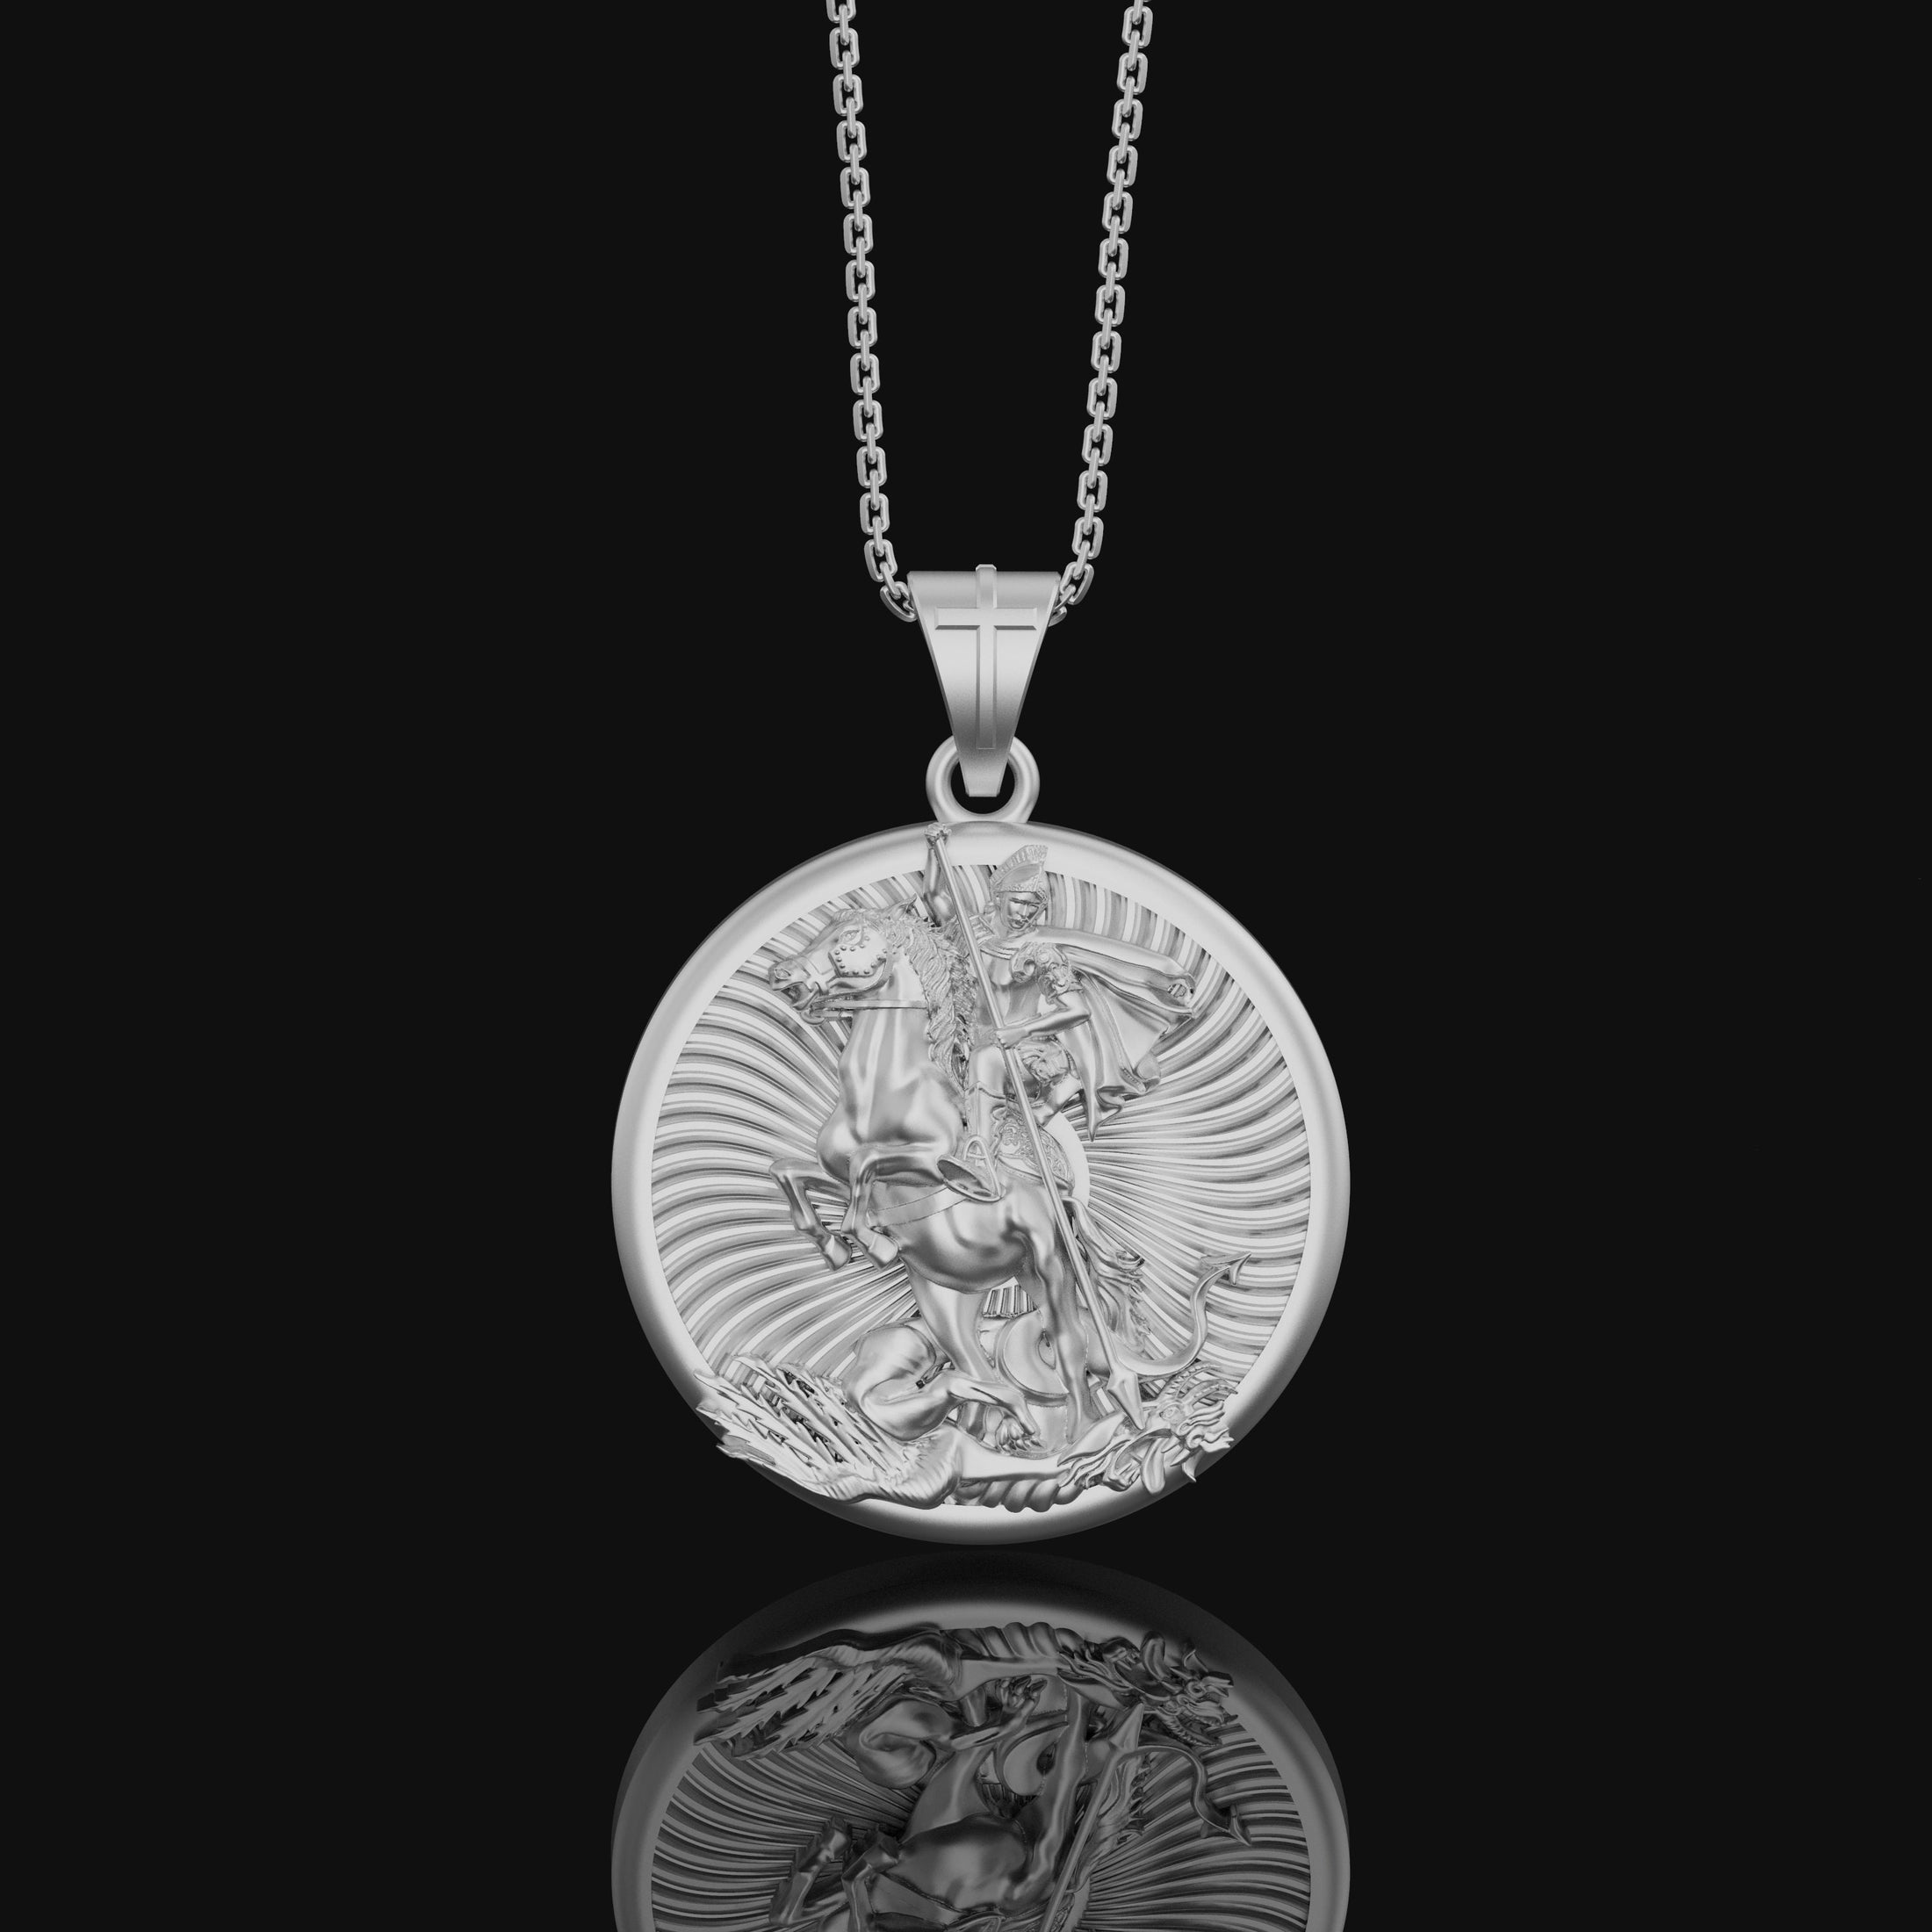 Silver Saint George Necklace - Patron Saint of Soldiers Pendant, Christian Religious Jewelry Gift, Personalized Gift